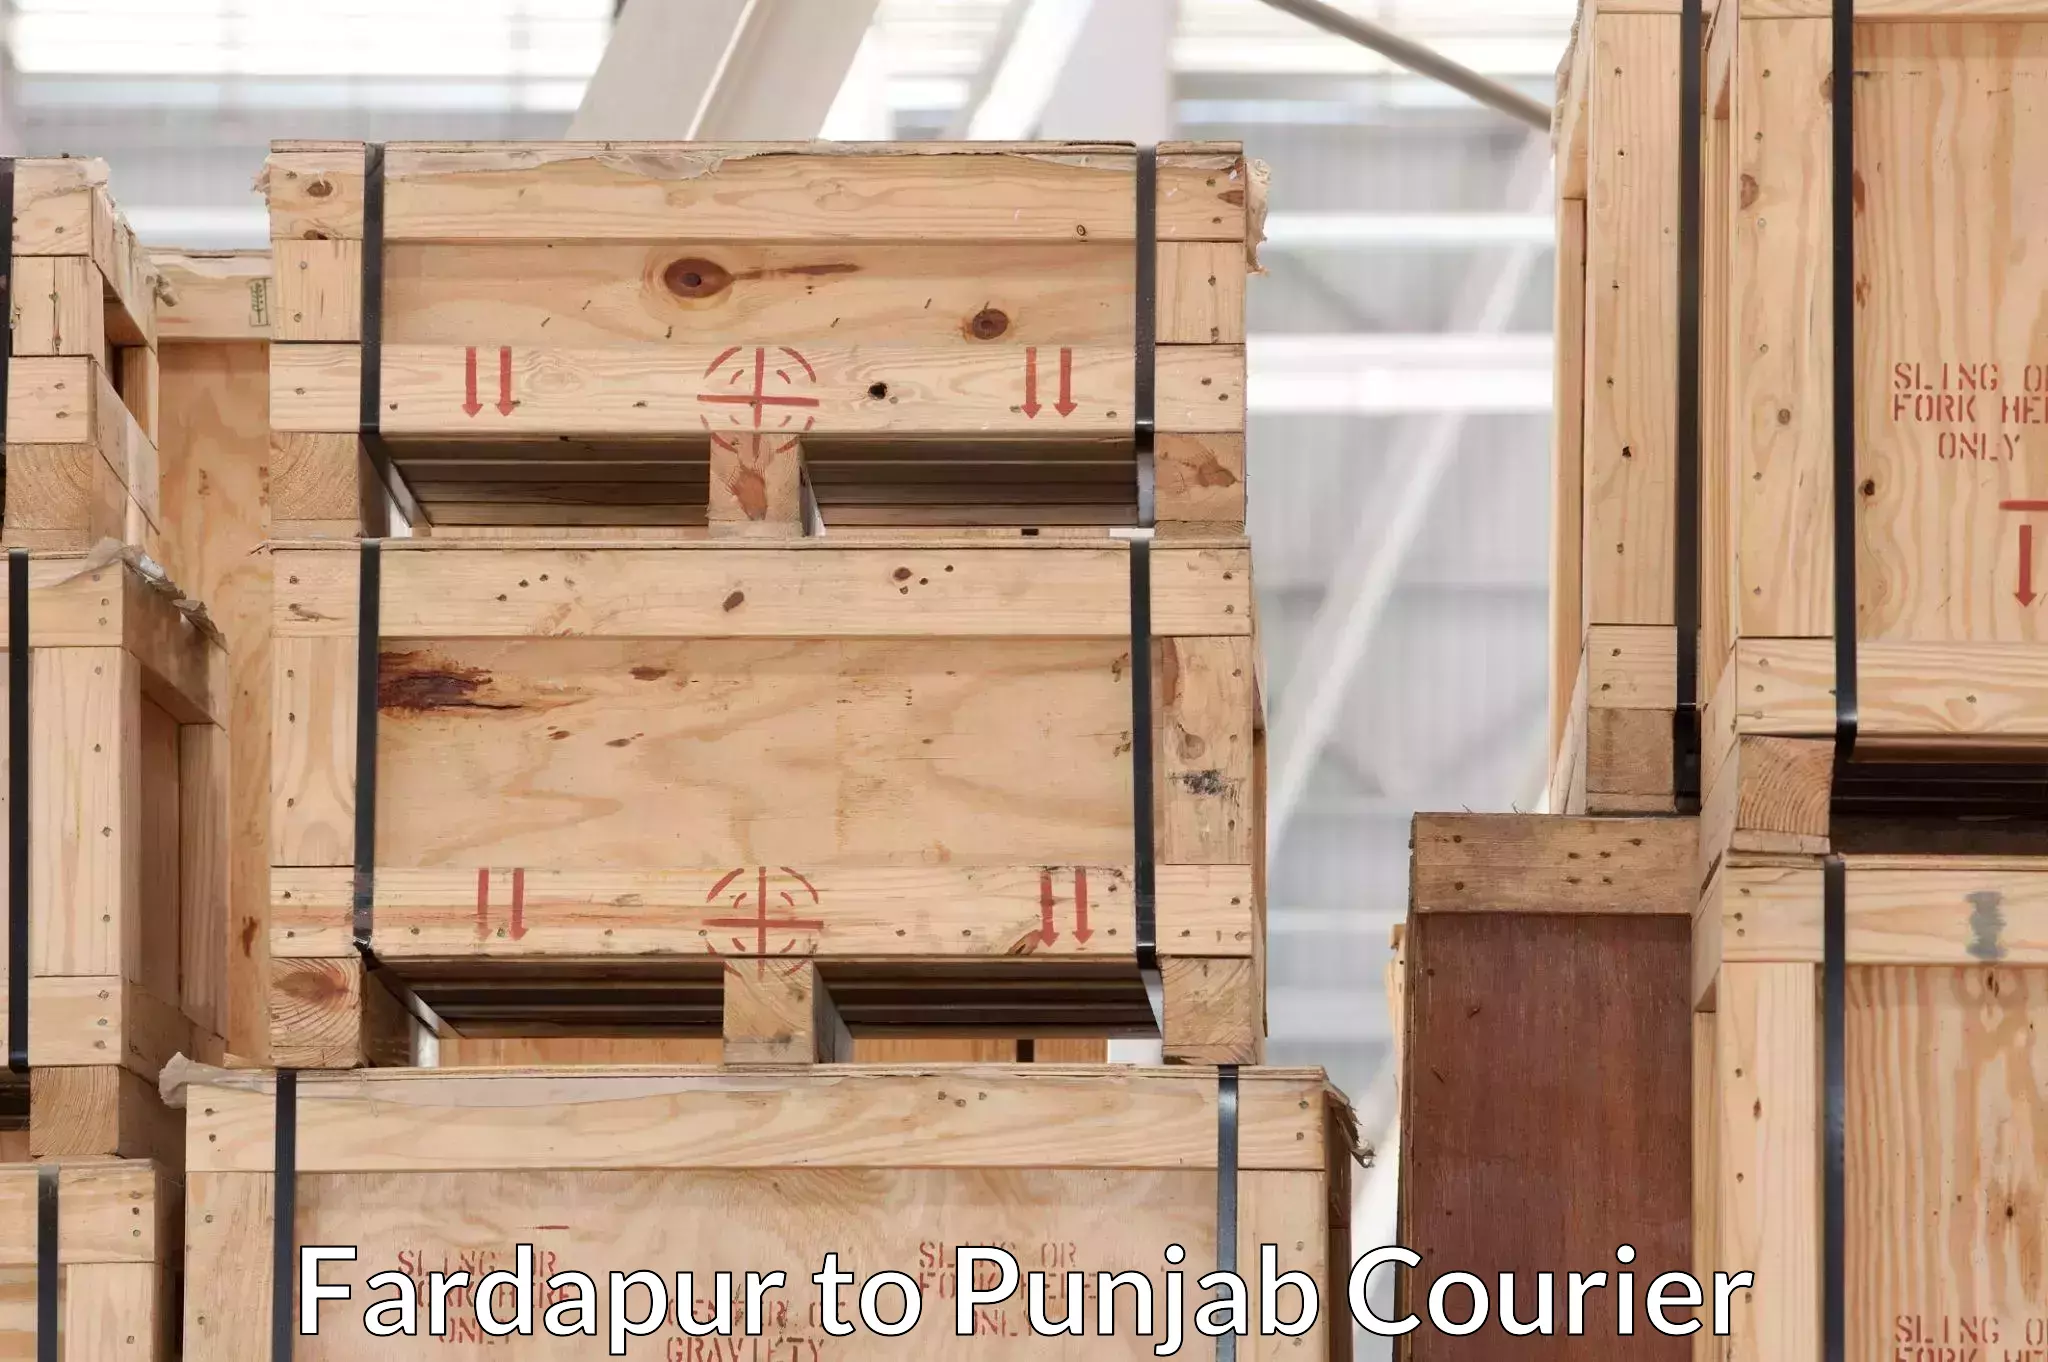 Furniture moving specialists Fardapur to Punjab